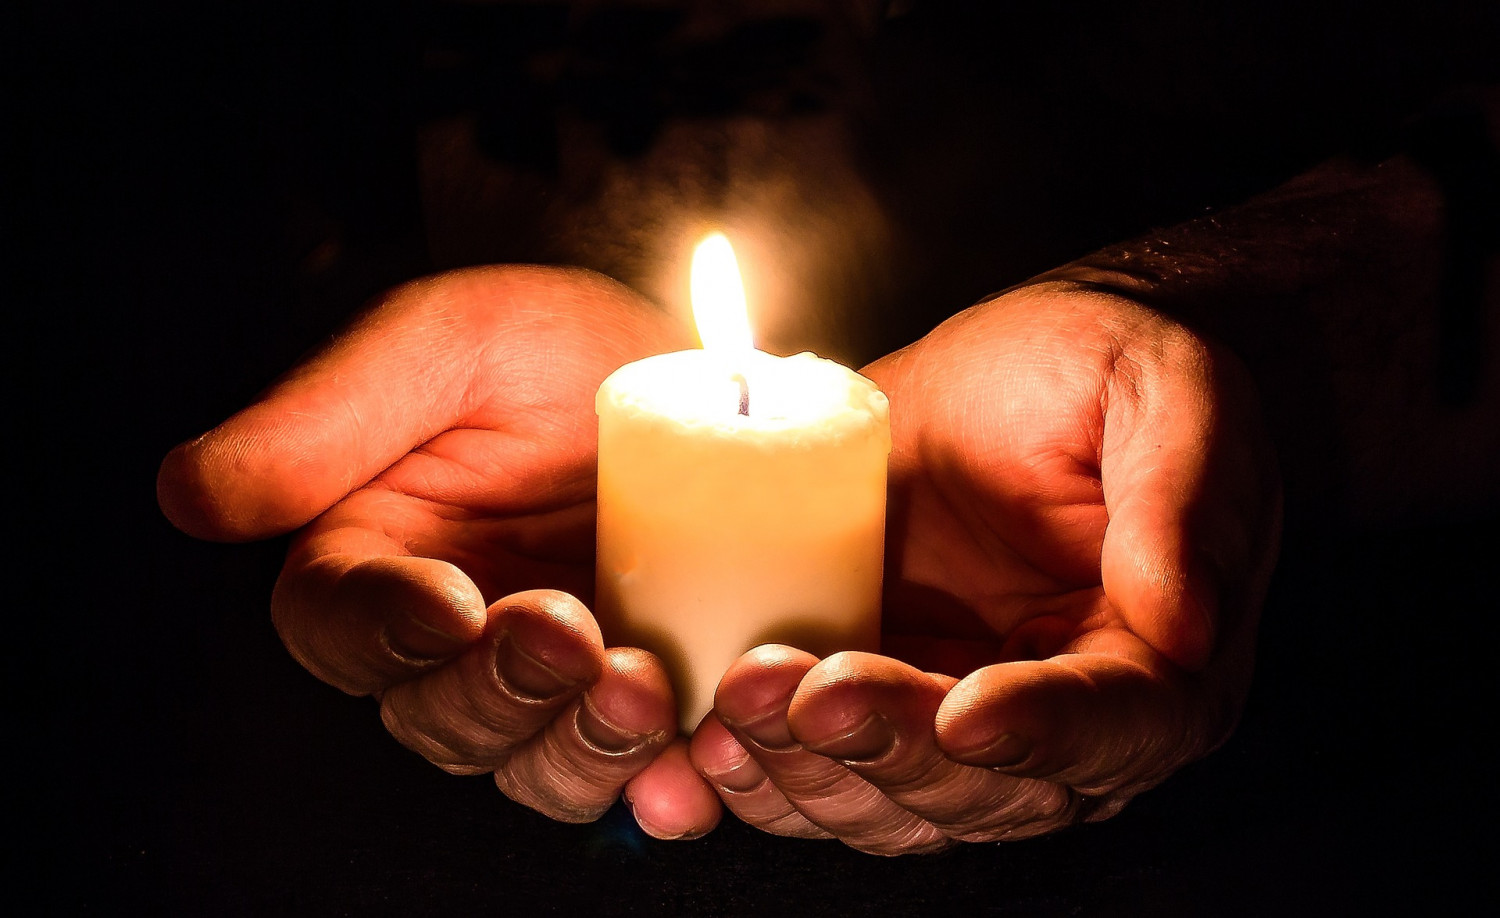 Hands holding a burning candle in the dark